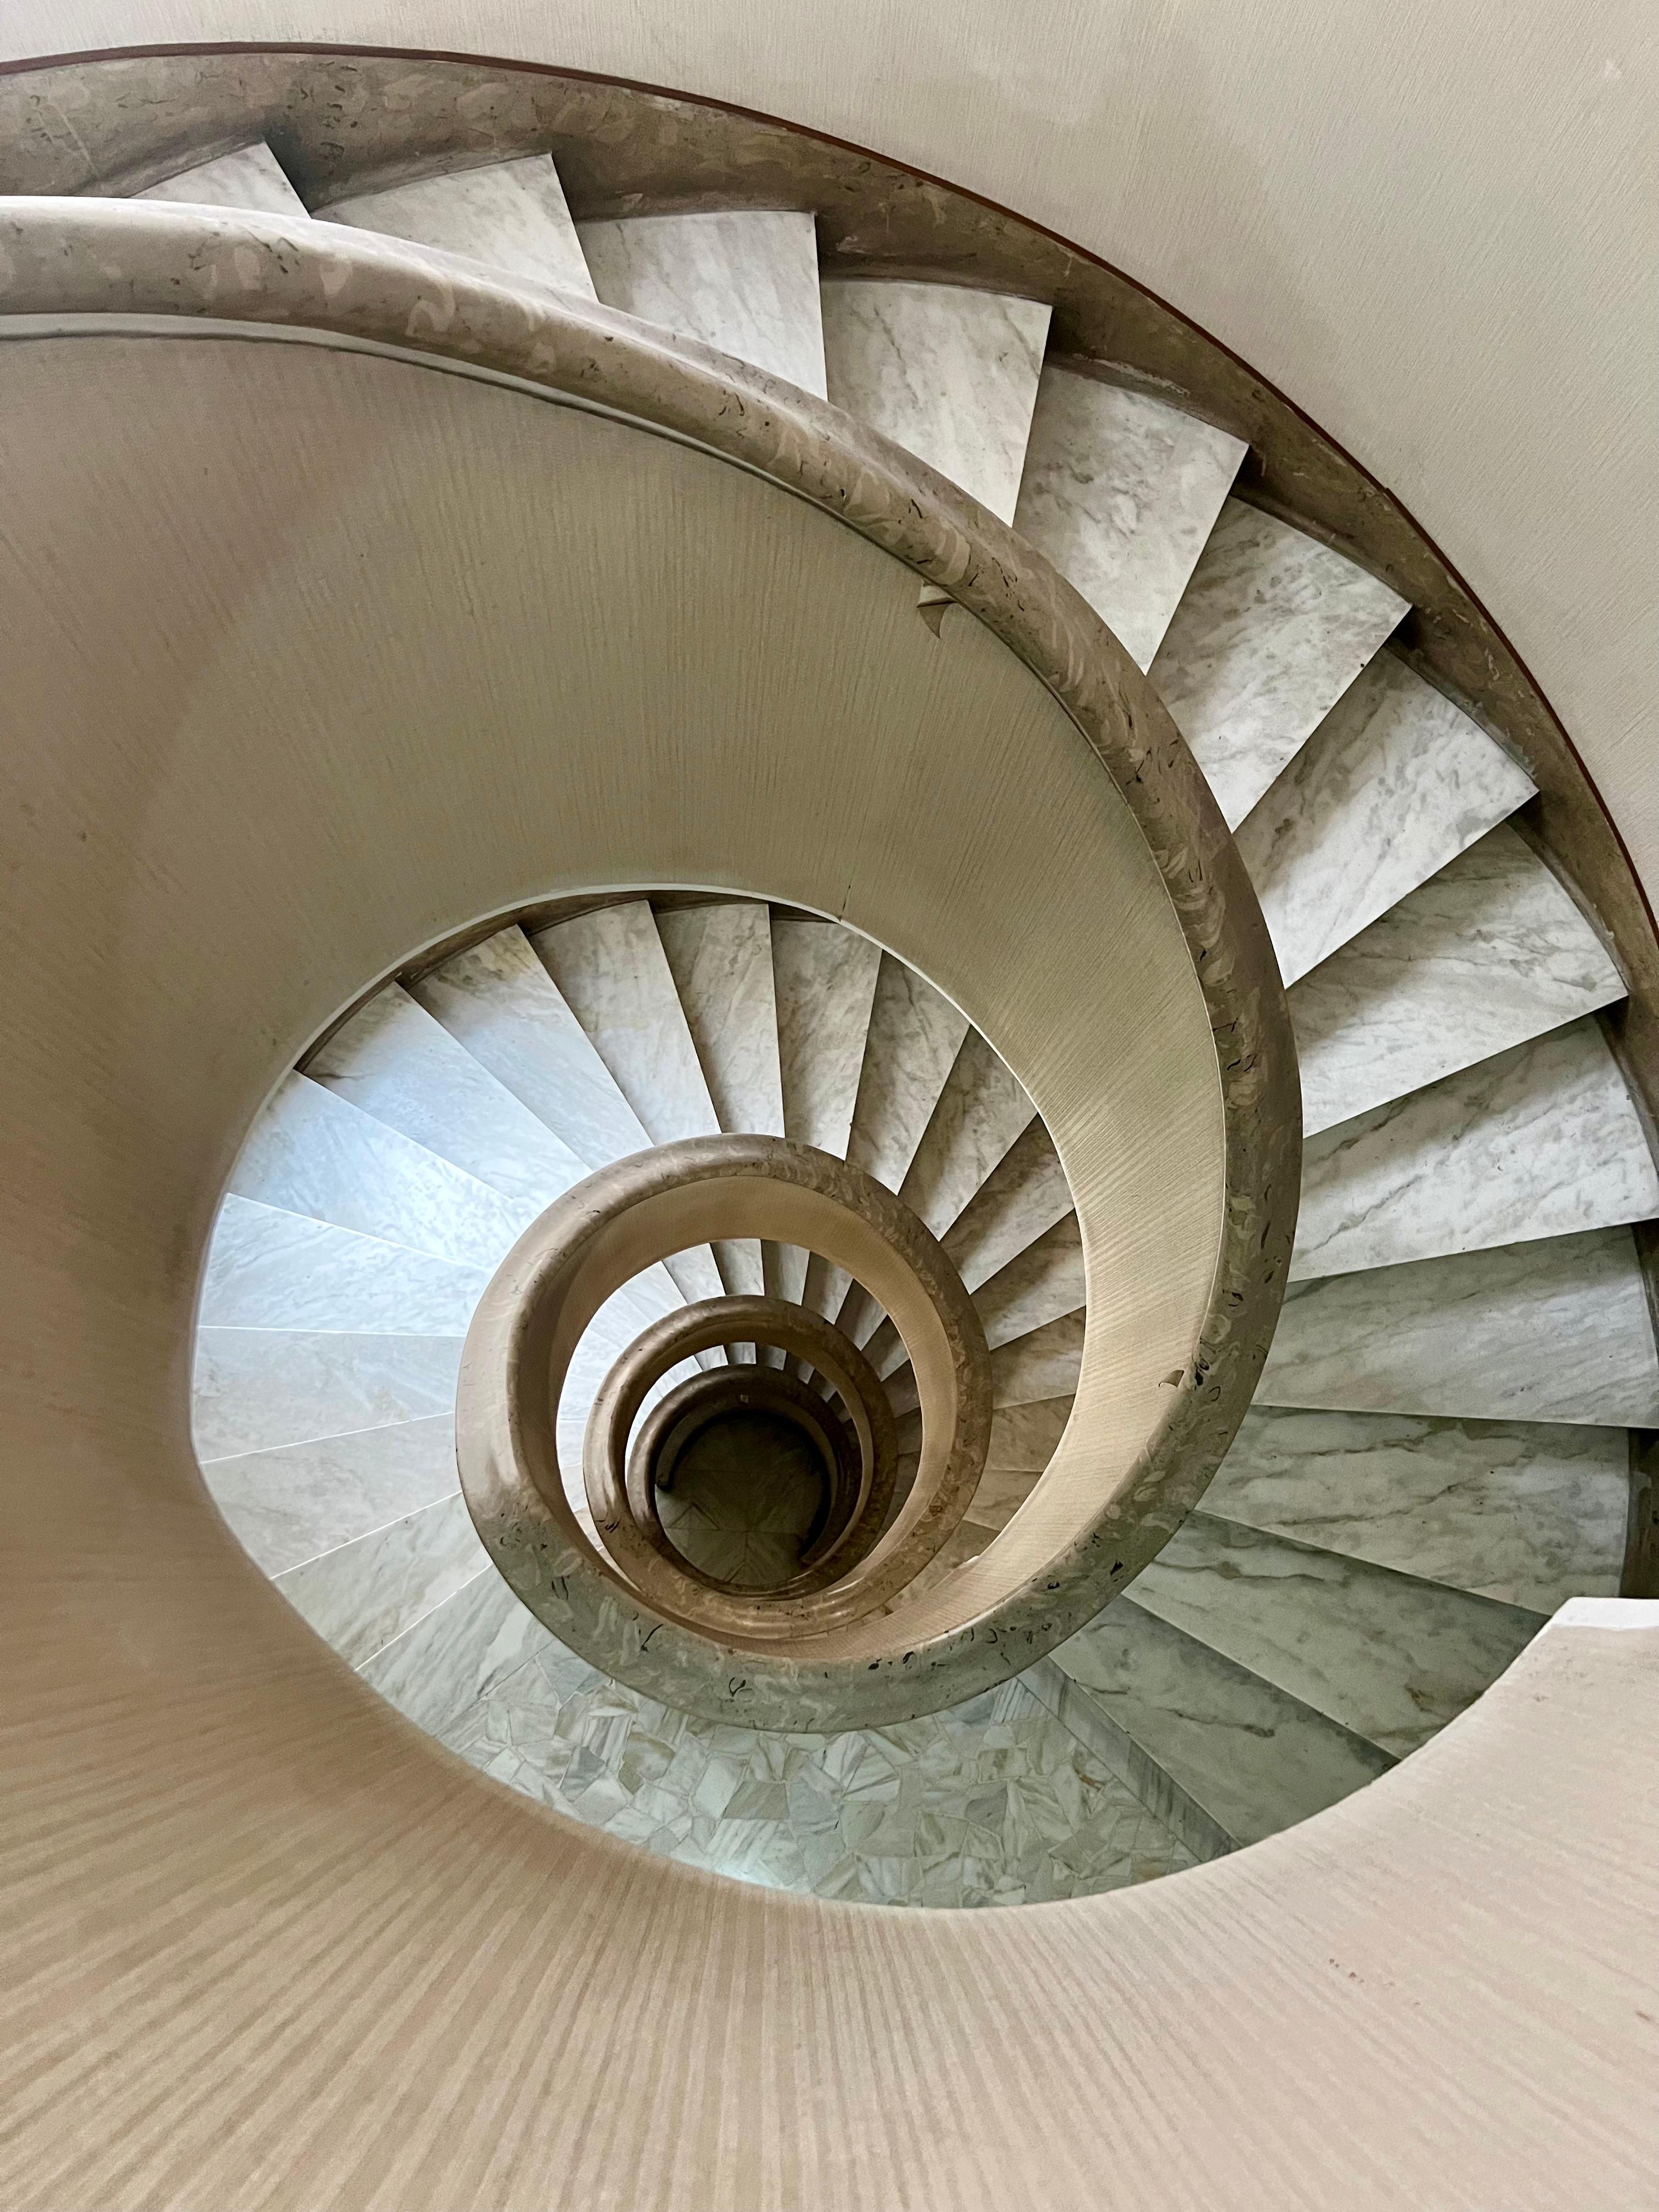 For a contemporary color photograph of a spiral staircase in Rome Roberta Fineberg captures the symmetrical cylindrical abstract quality of a building stairwell n the Eternal City. For her Cities series, RF travels often to Europe and Rome is at the